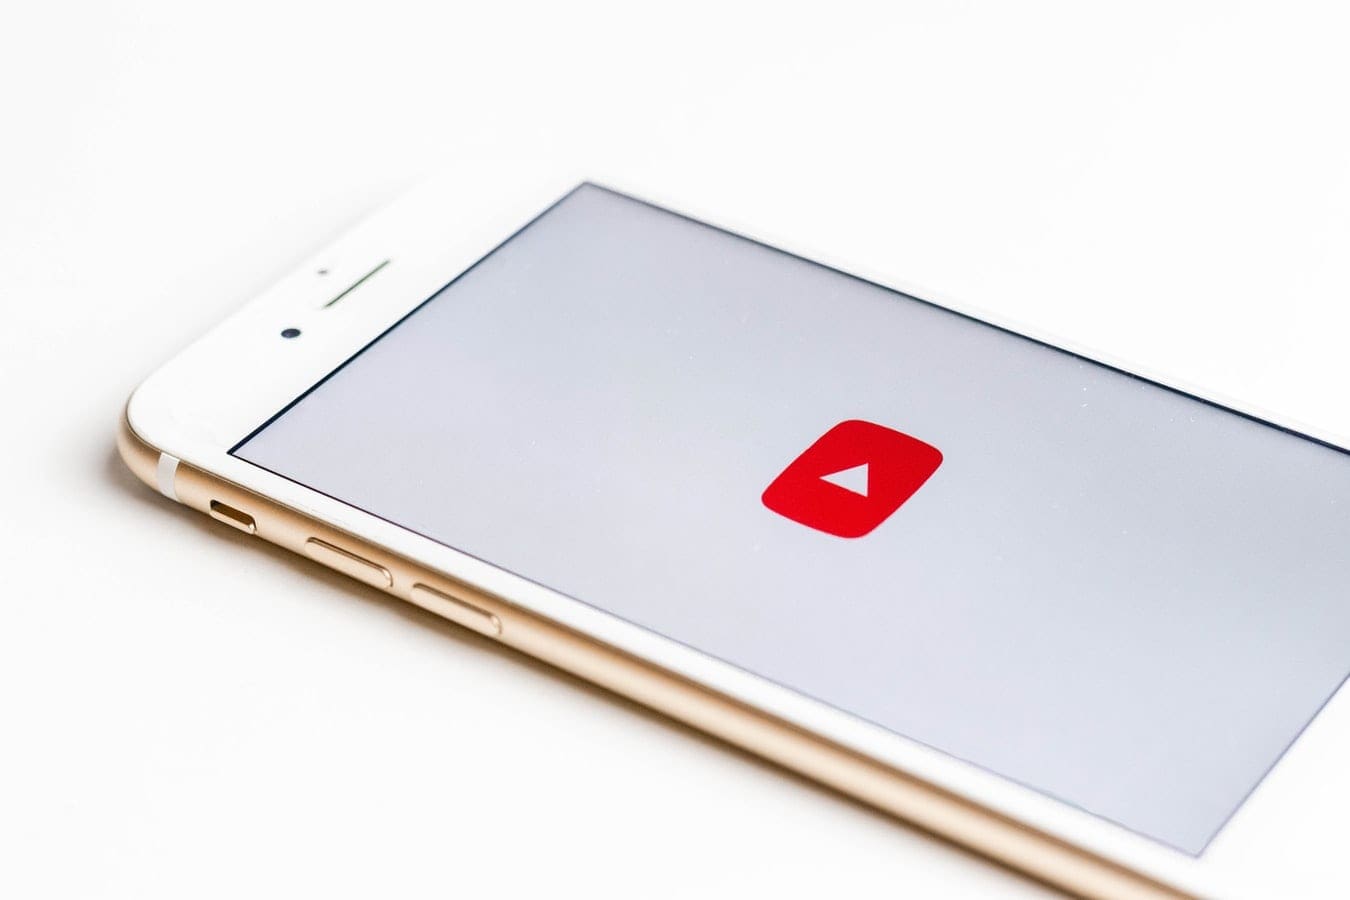 Setting Default Playback Speed in YouTube App